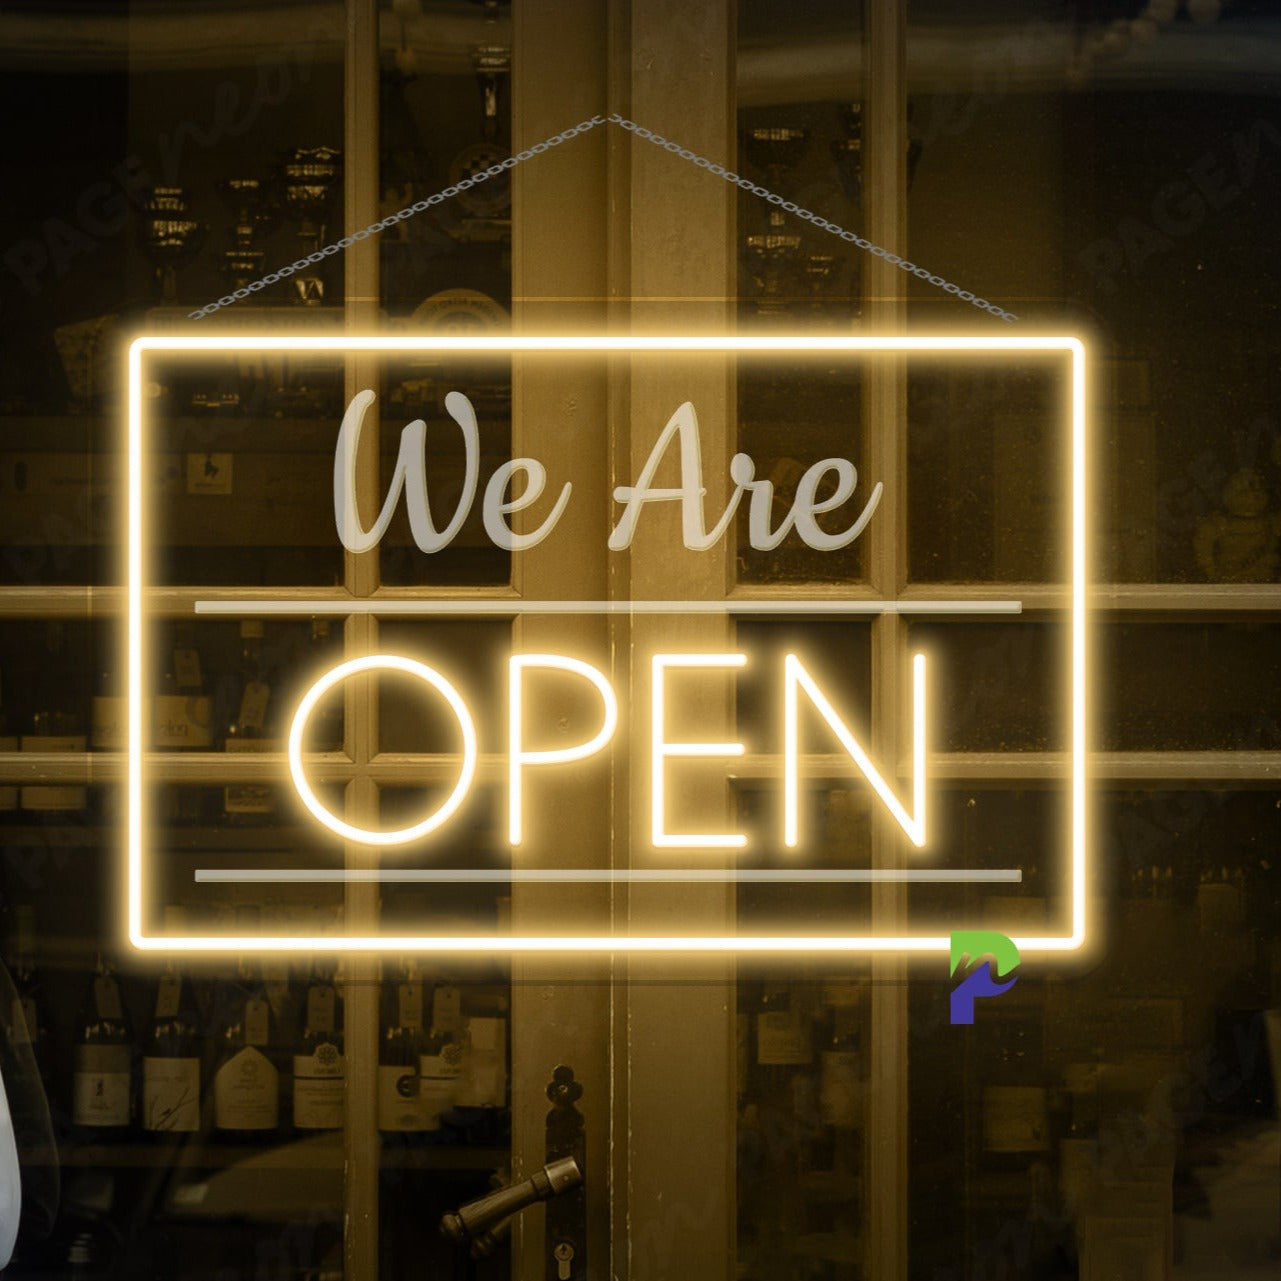 We Are Open Neon Sign Large Business Led Light